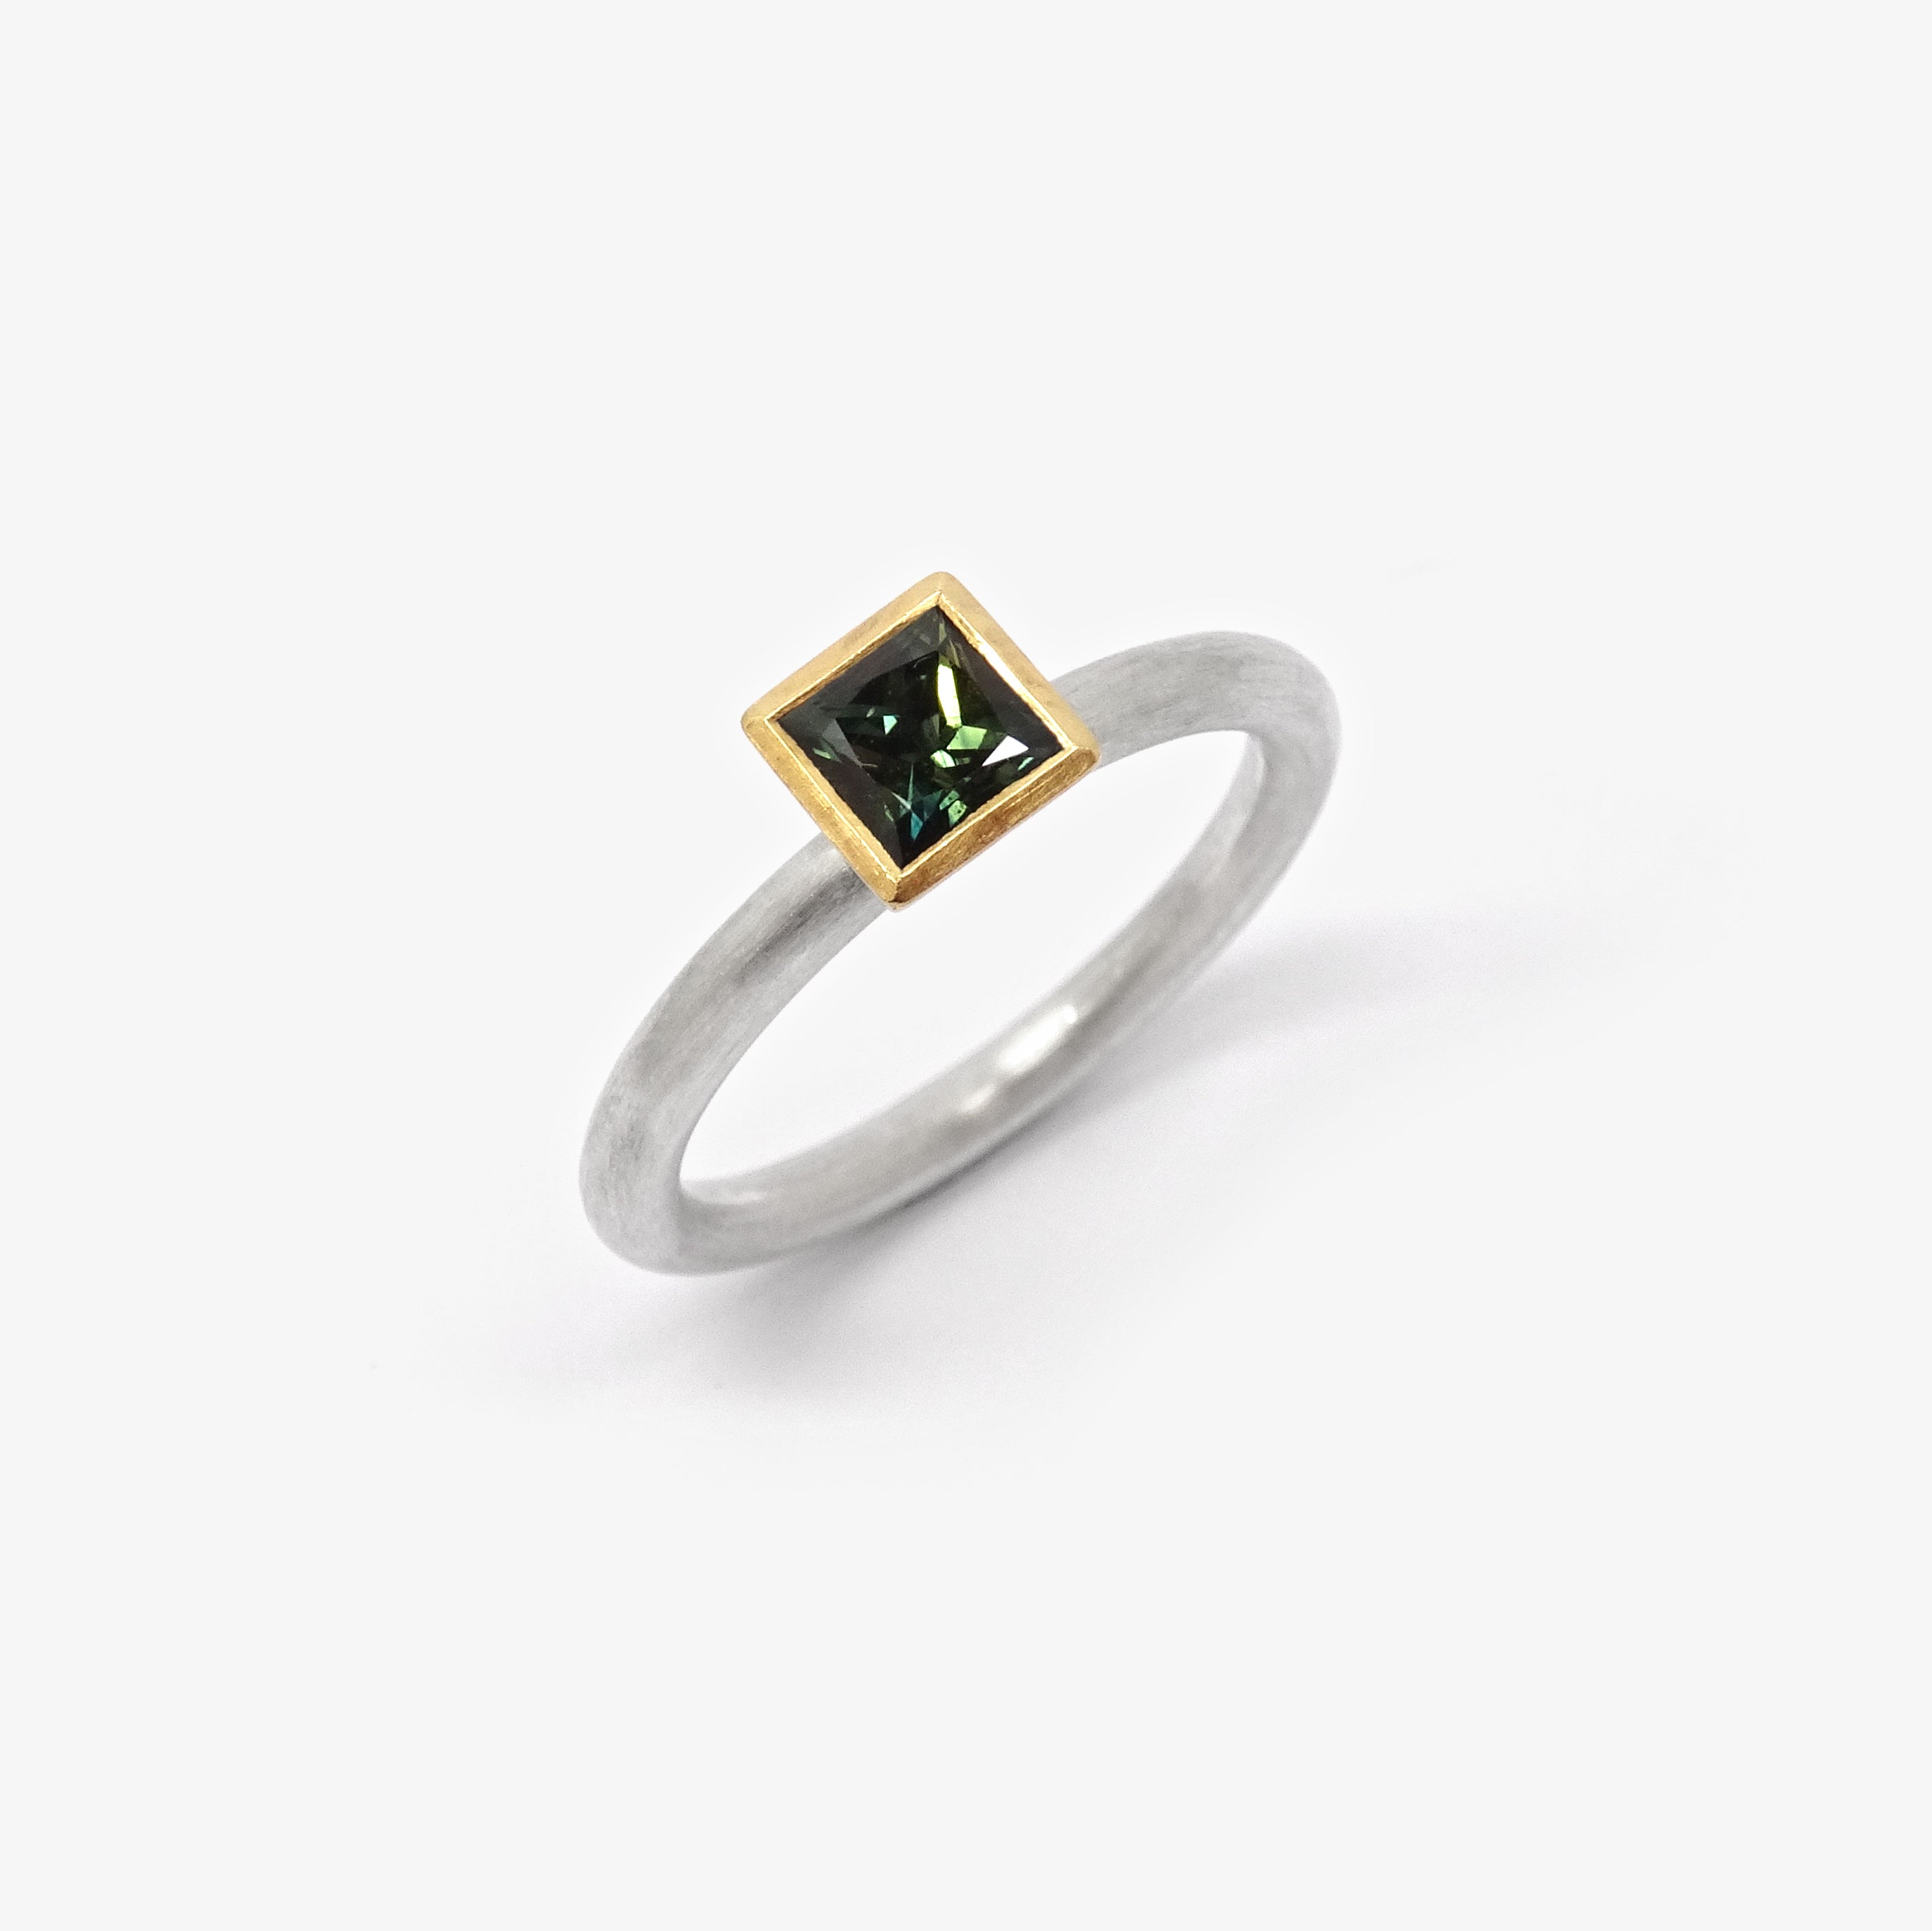 GREEN SAPPHIRE RING - 5MM SQUARE